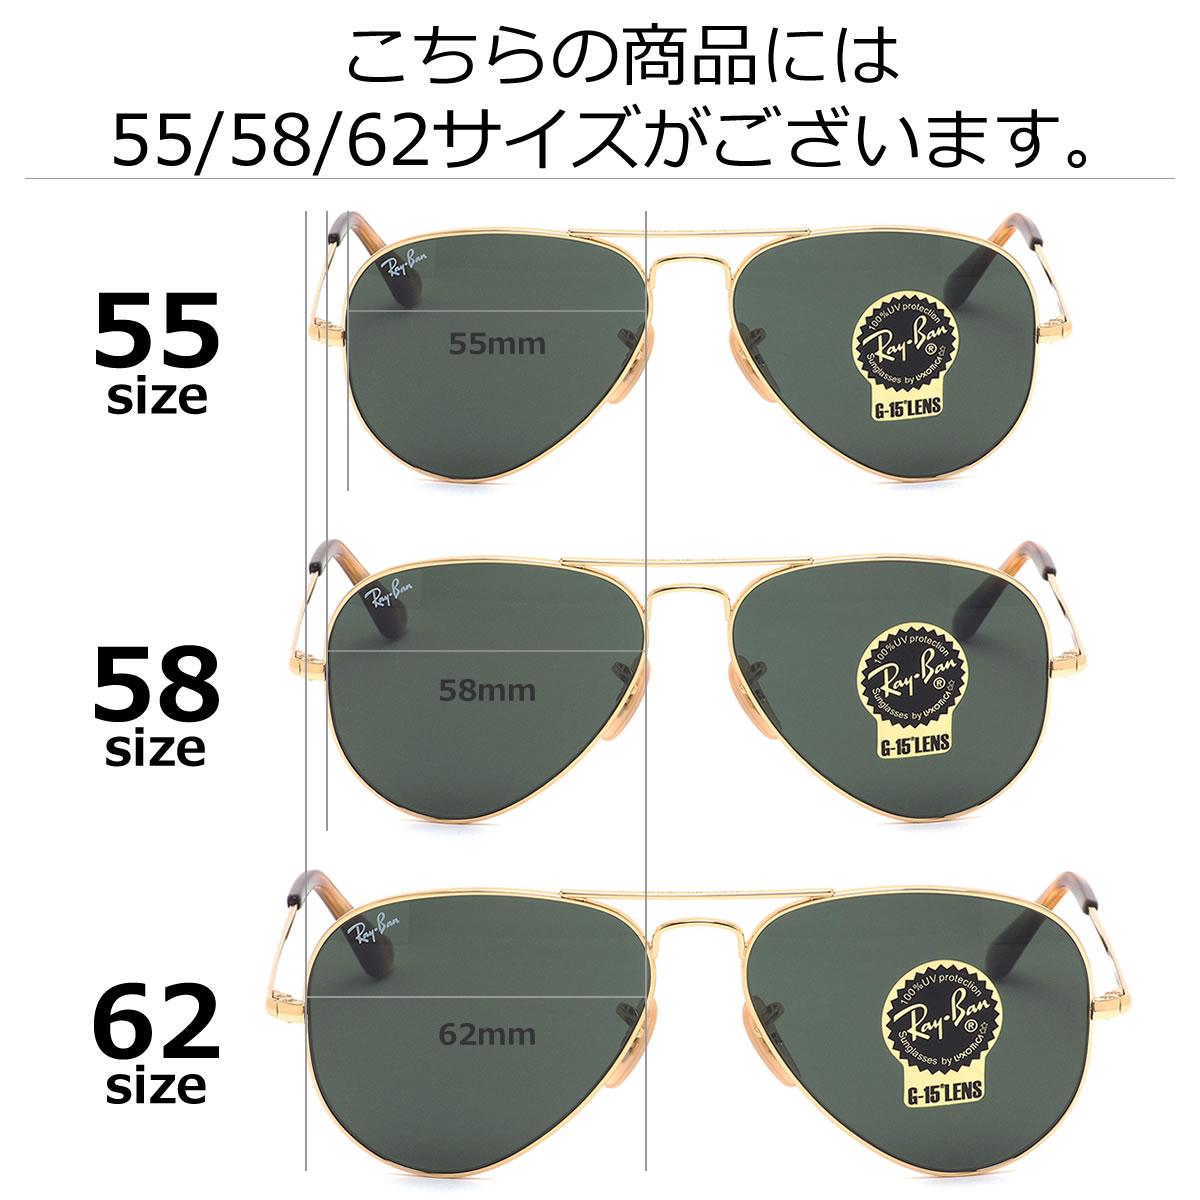 Ray Ban Sizes Deals Discounts, Save 51% 